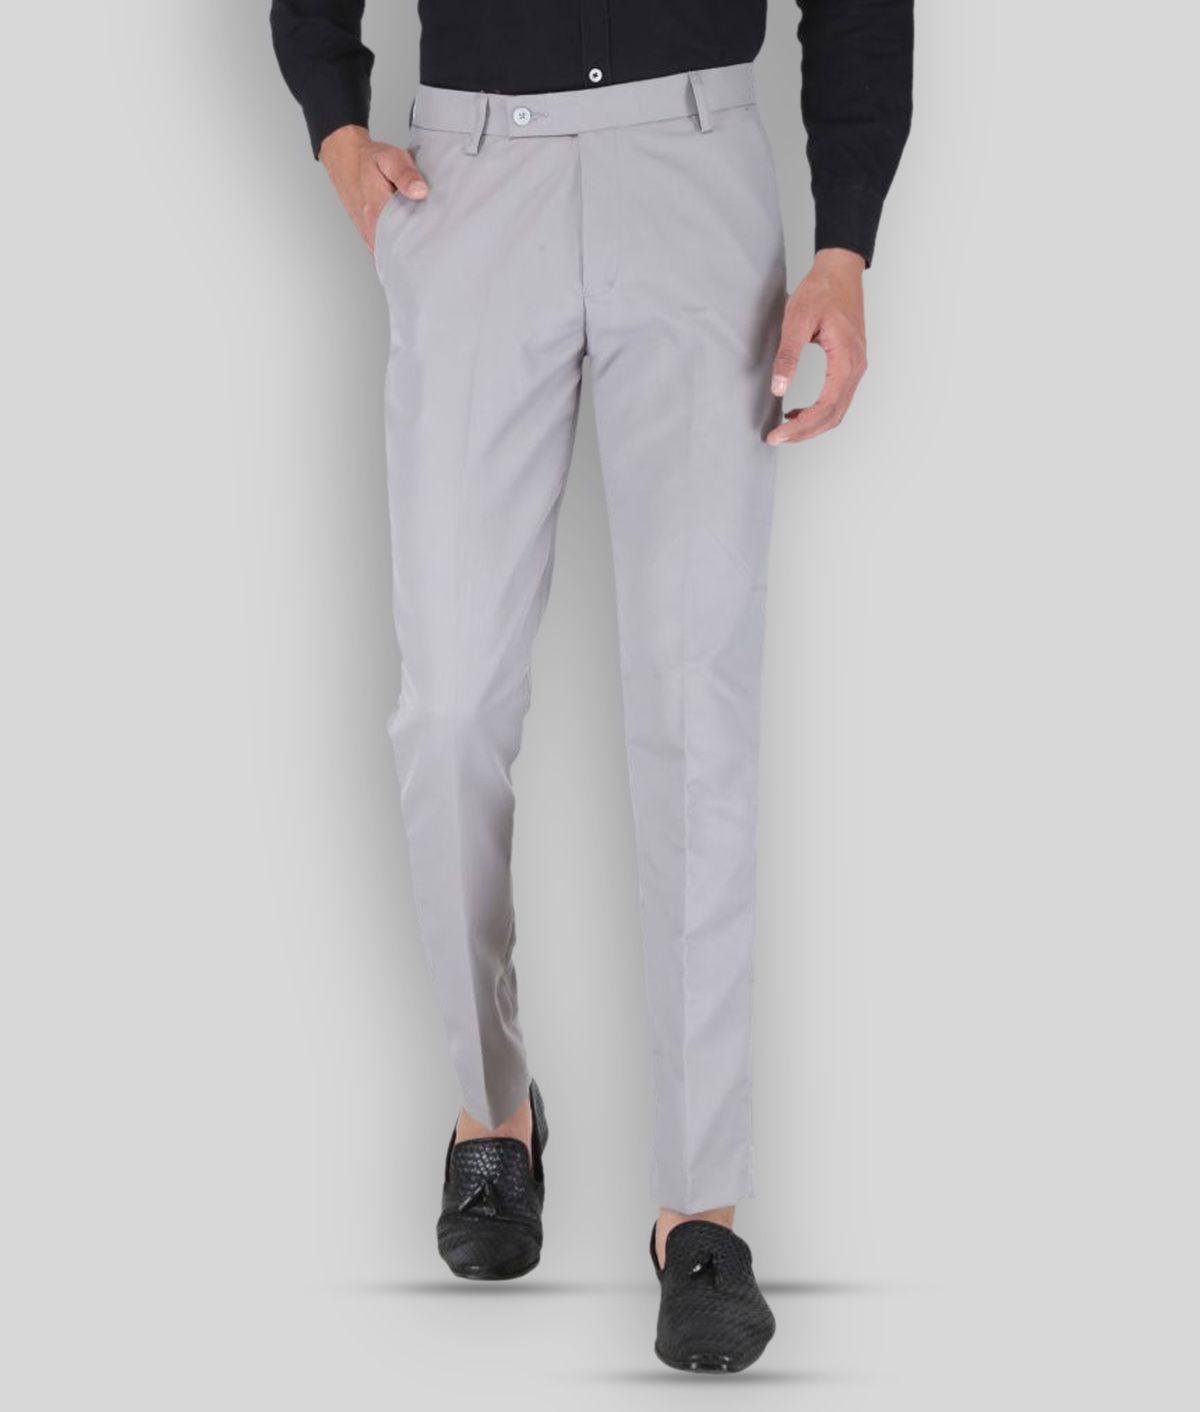     			Playerz - Grey Polycotton Slim - Fit Men's Trousers ( Pack of 1 )